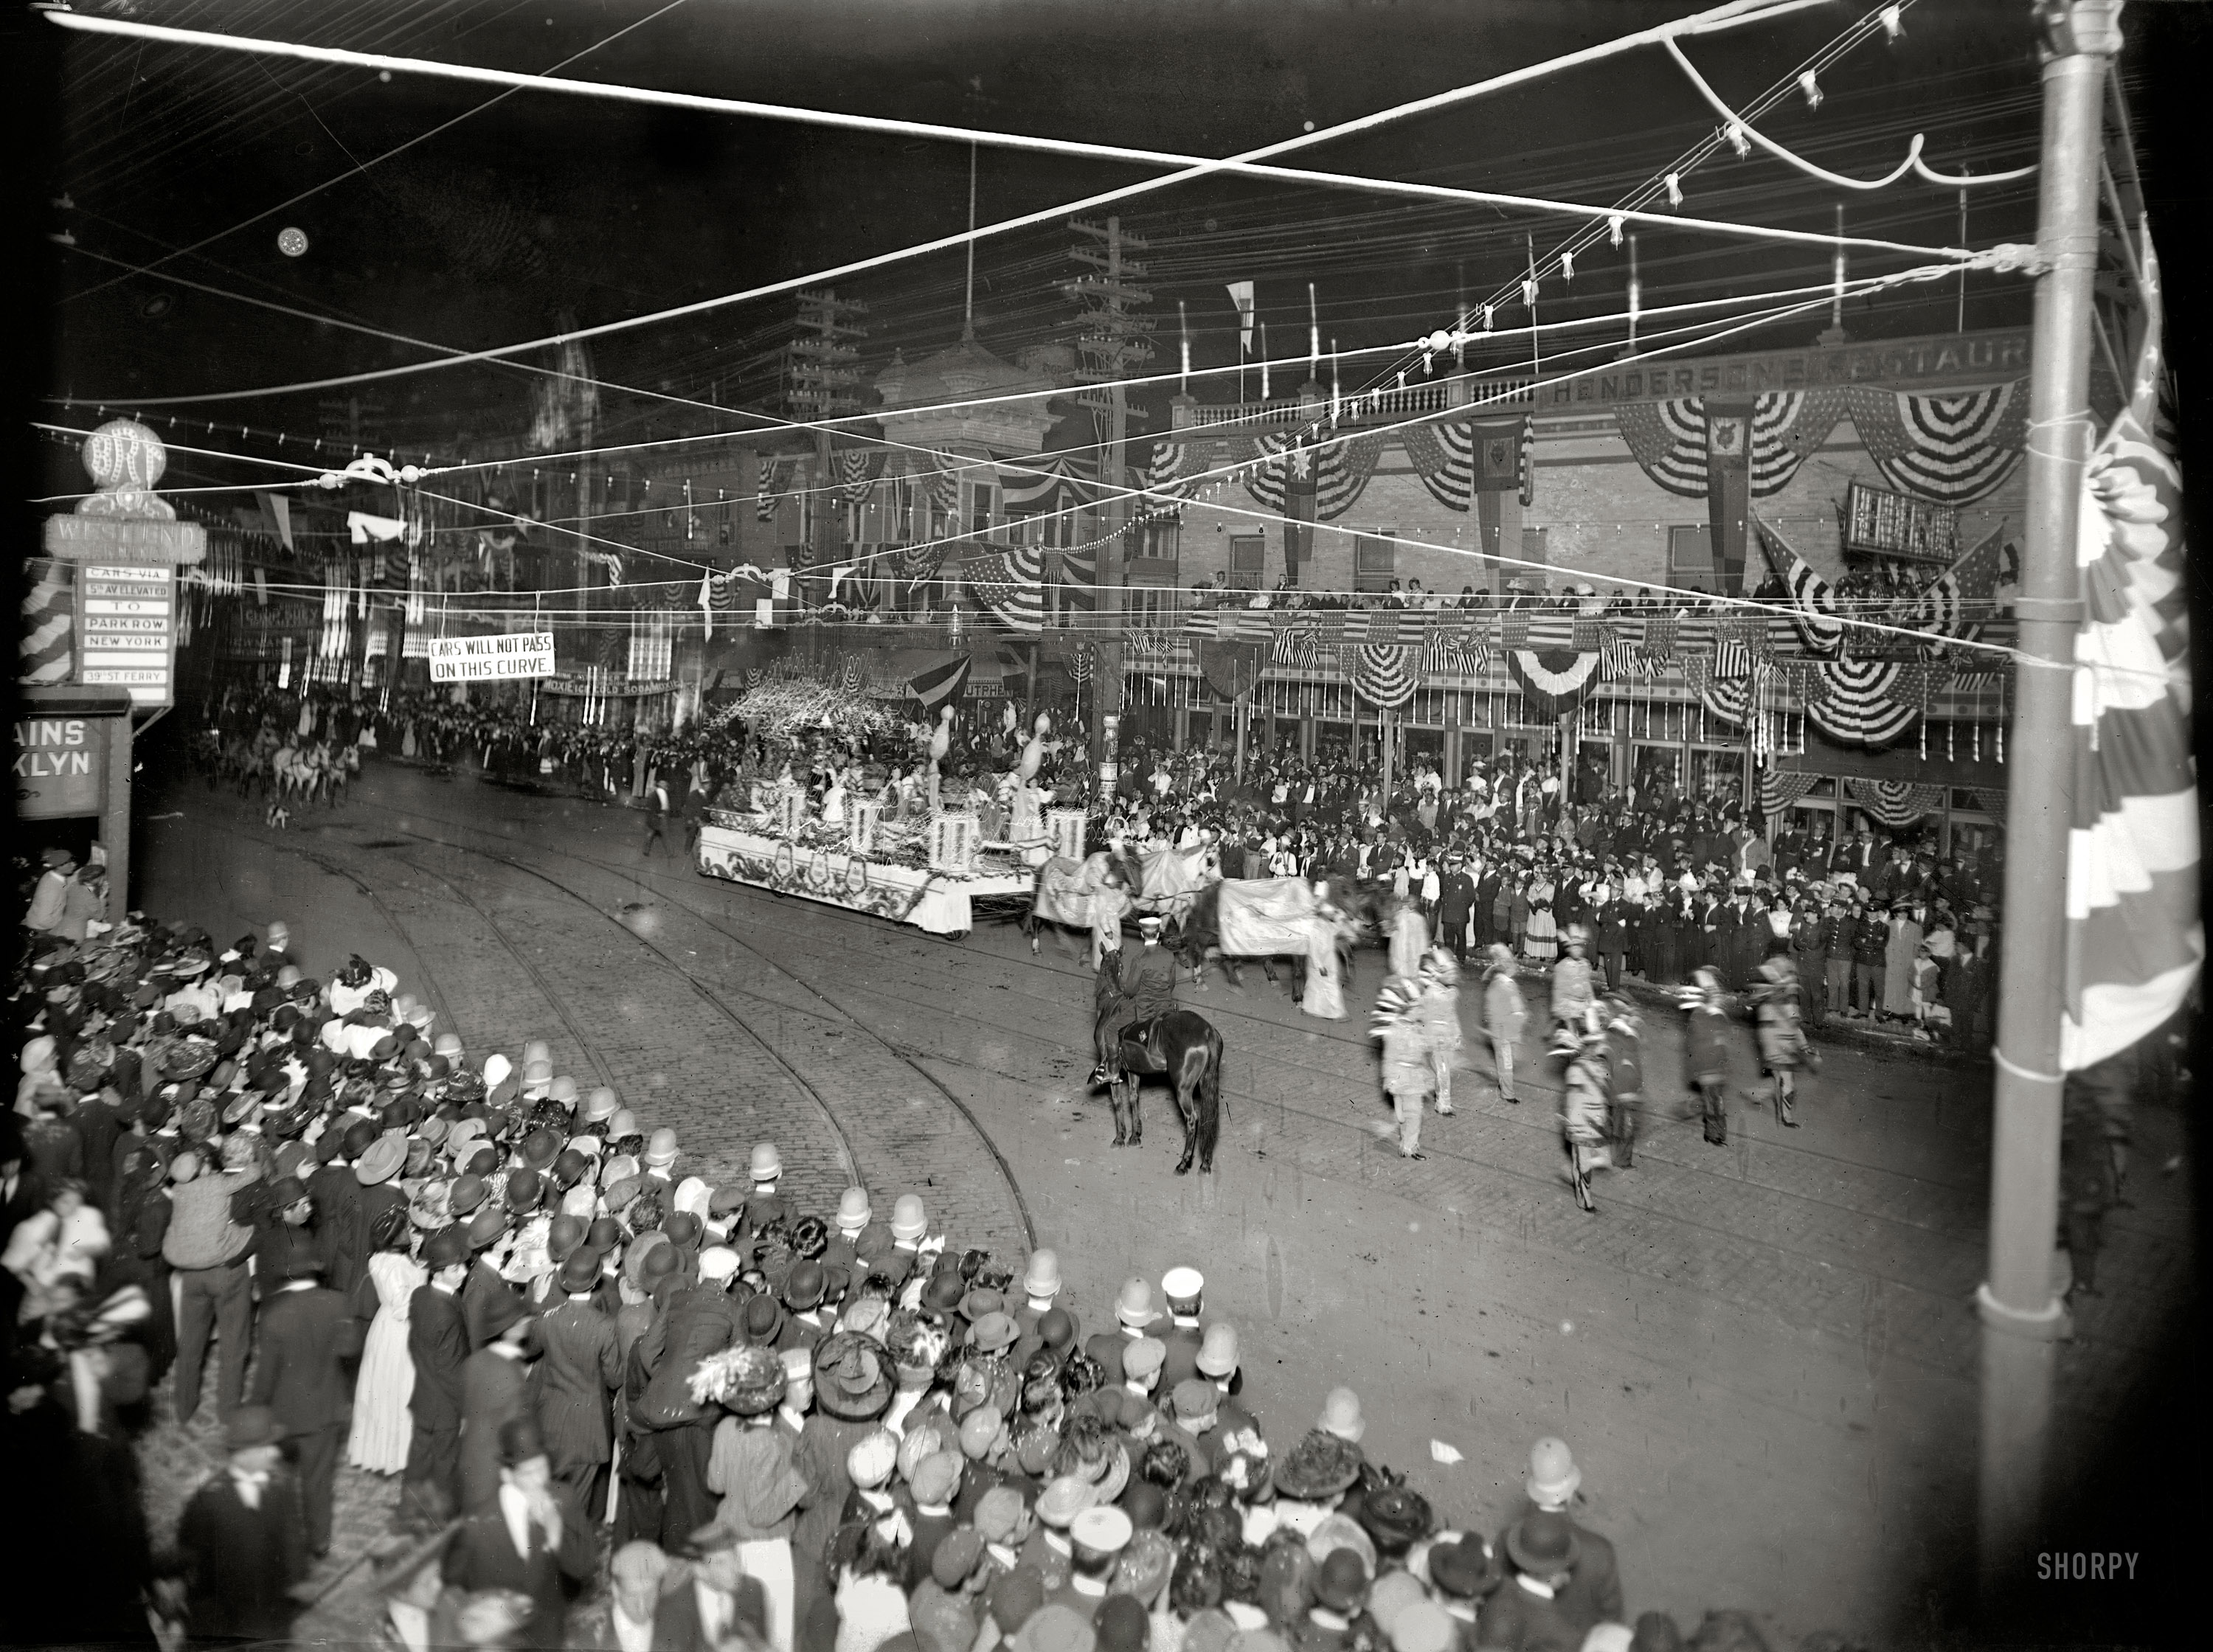 "Coney Island Mardi Gras, 1908." Bon temps New York style. 8x10 inch glass negative, George Grantham Bain Collection. View full size.